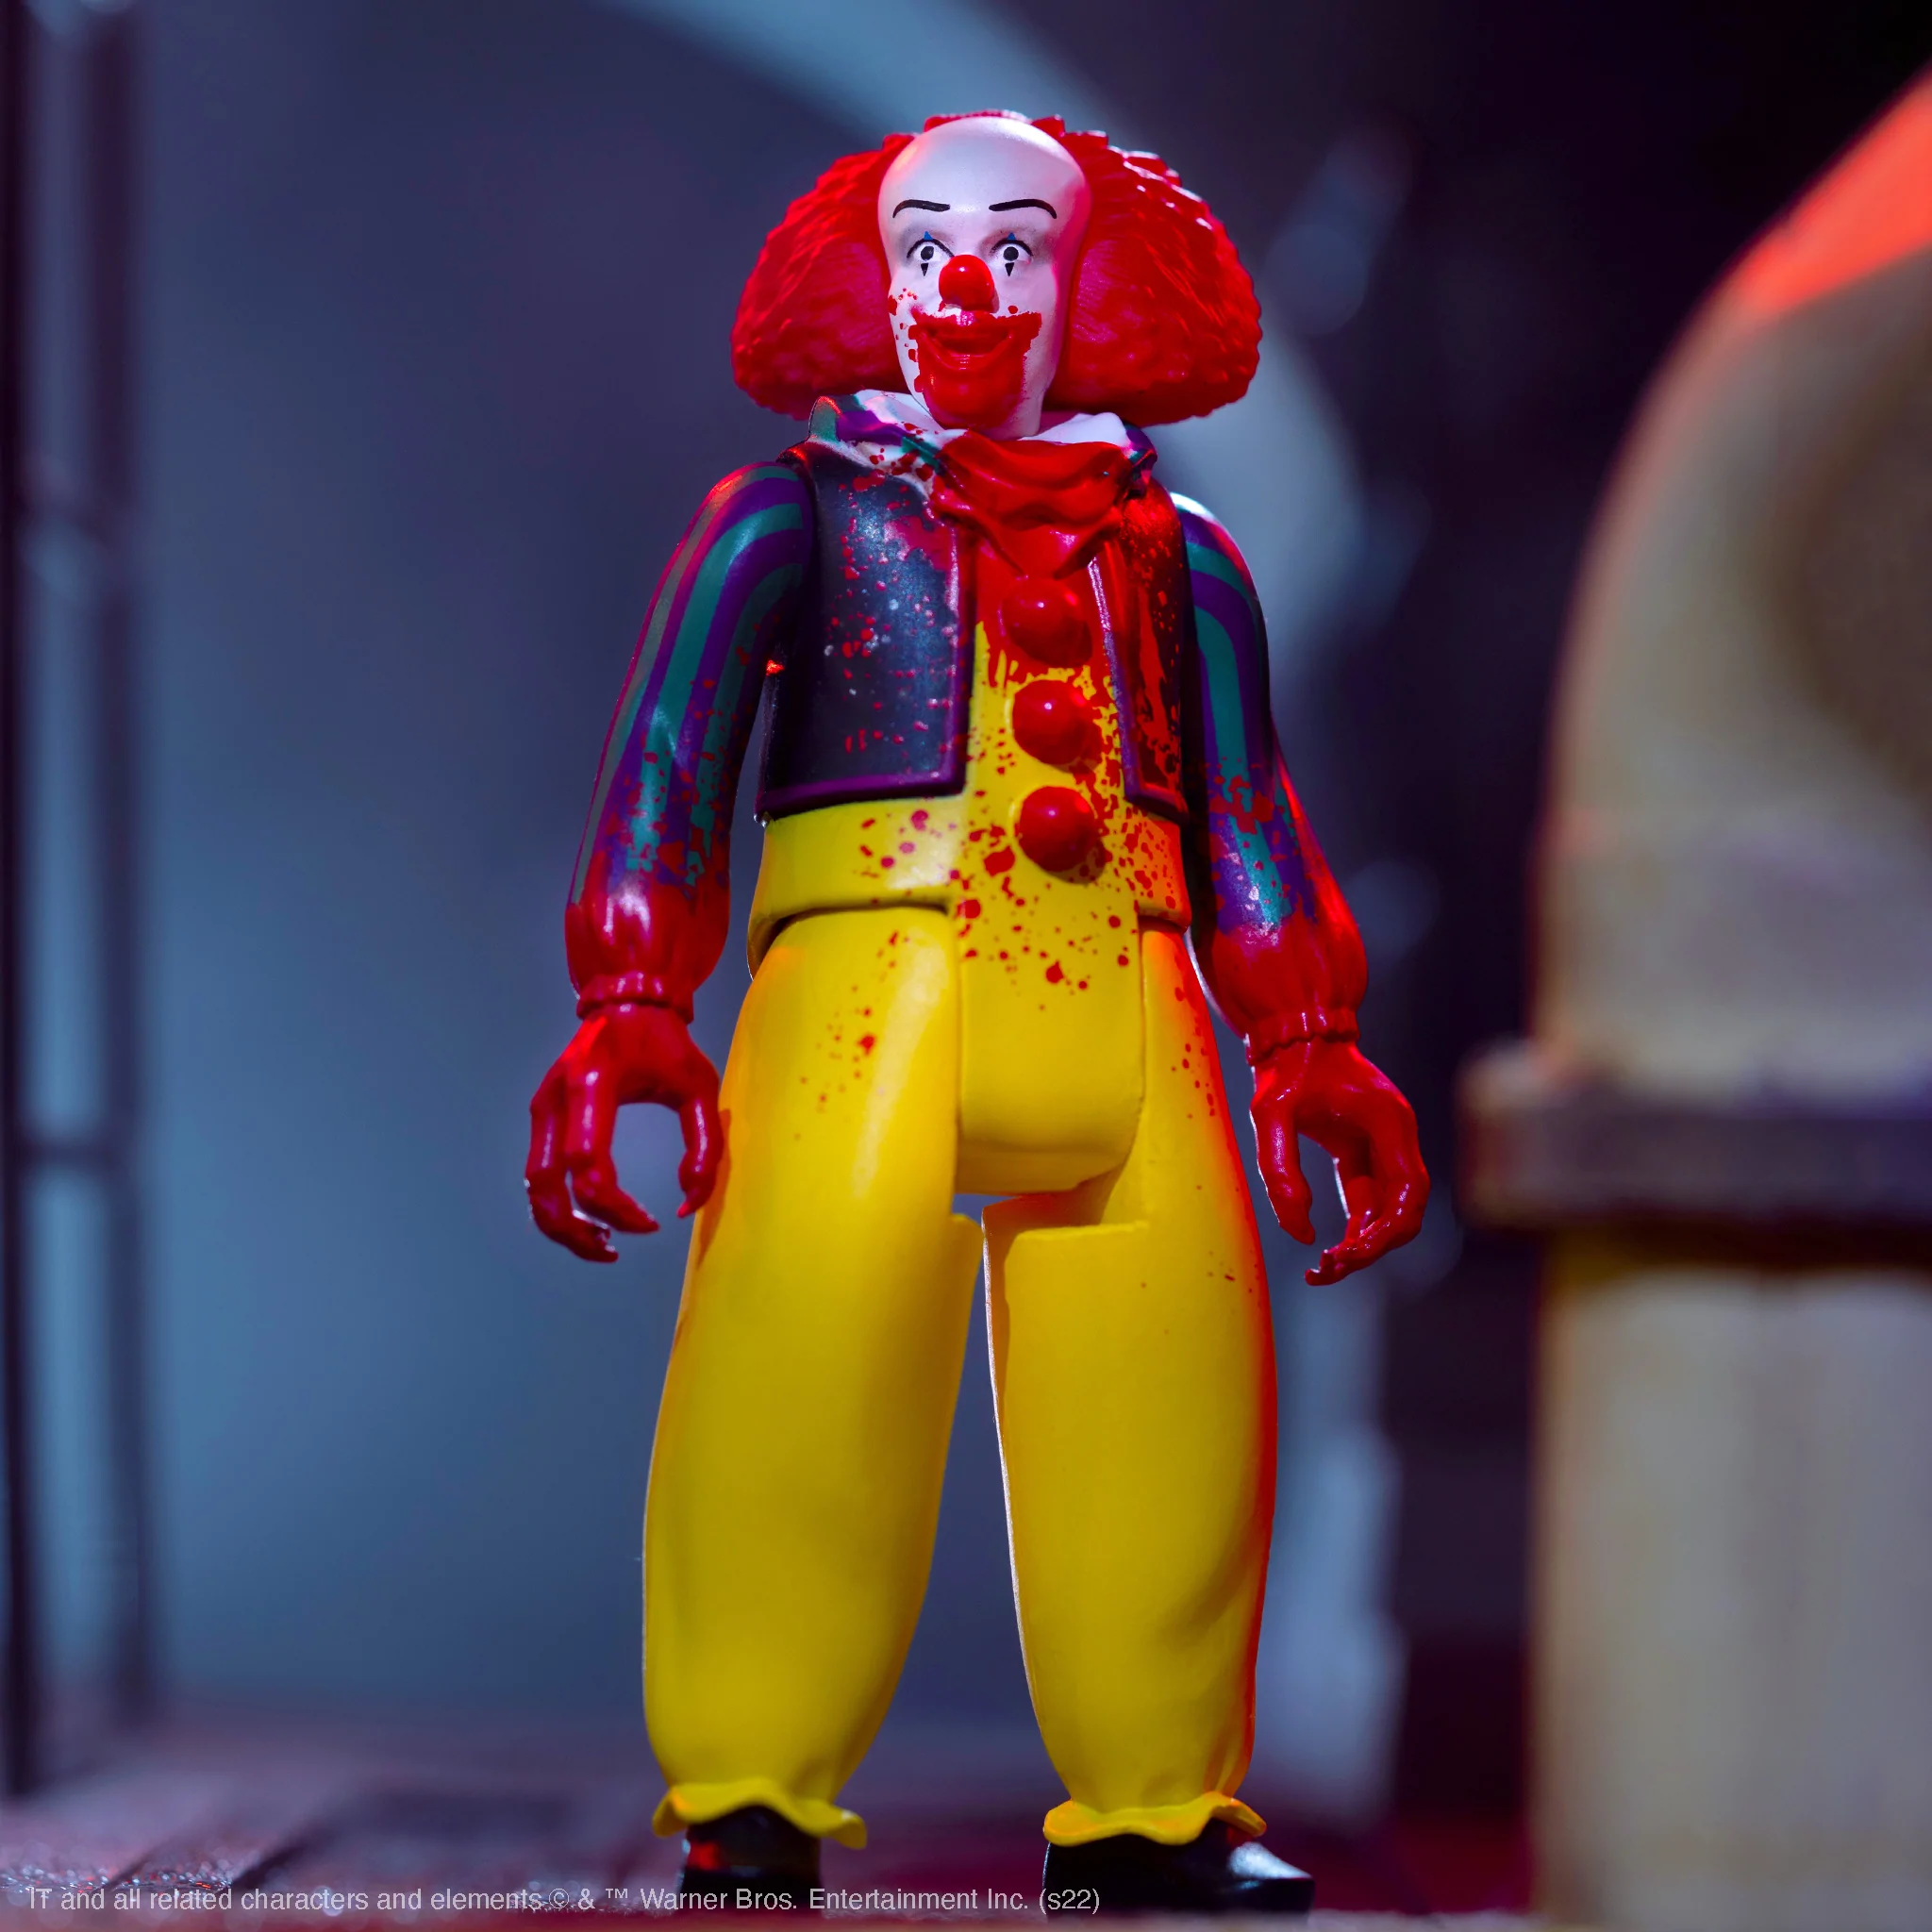 Super7 Figurine Pennywise1990 2022 Version Bloodied 04